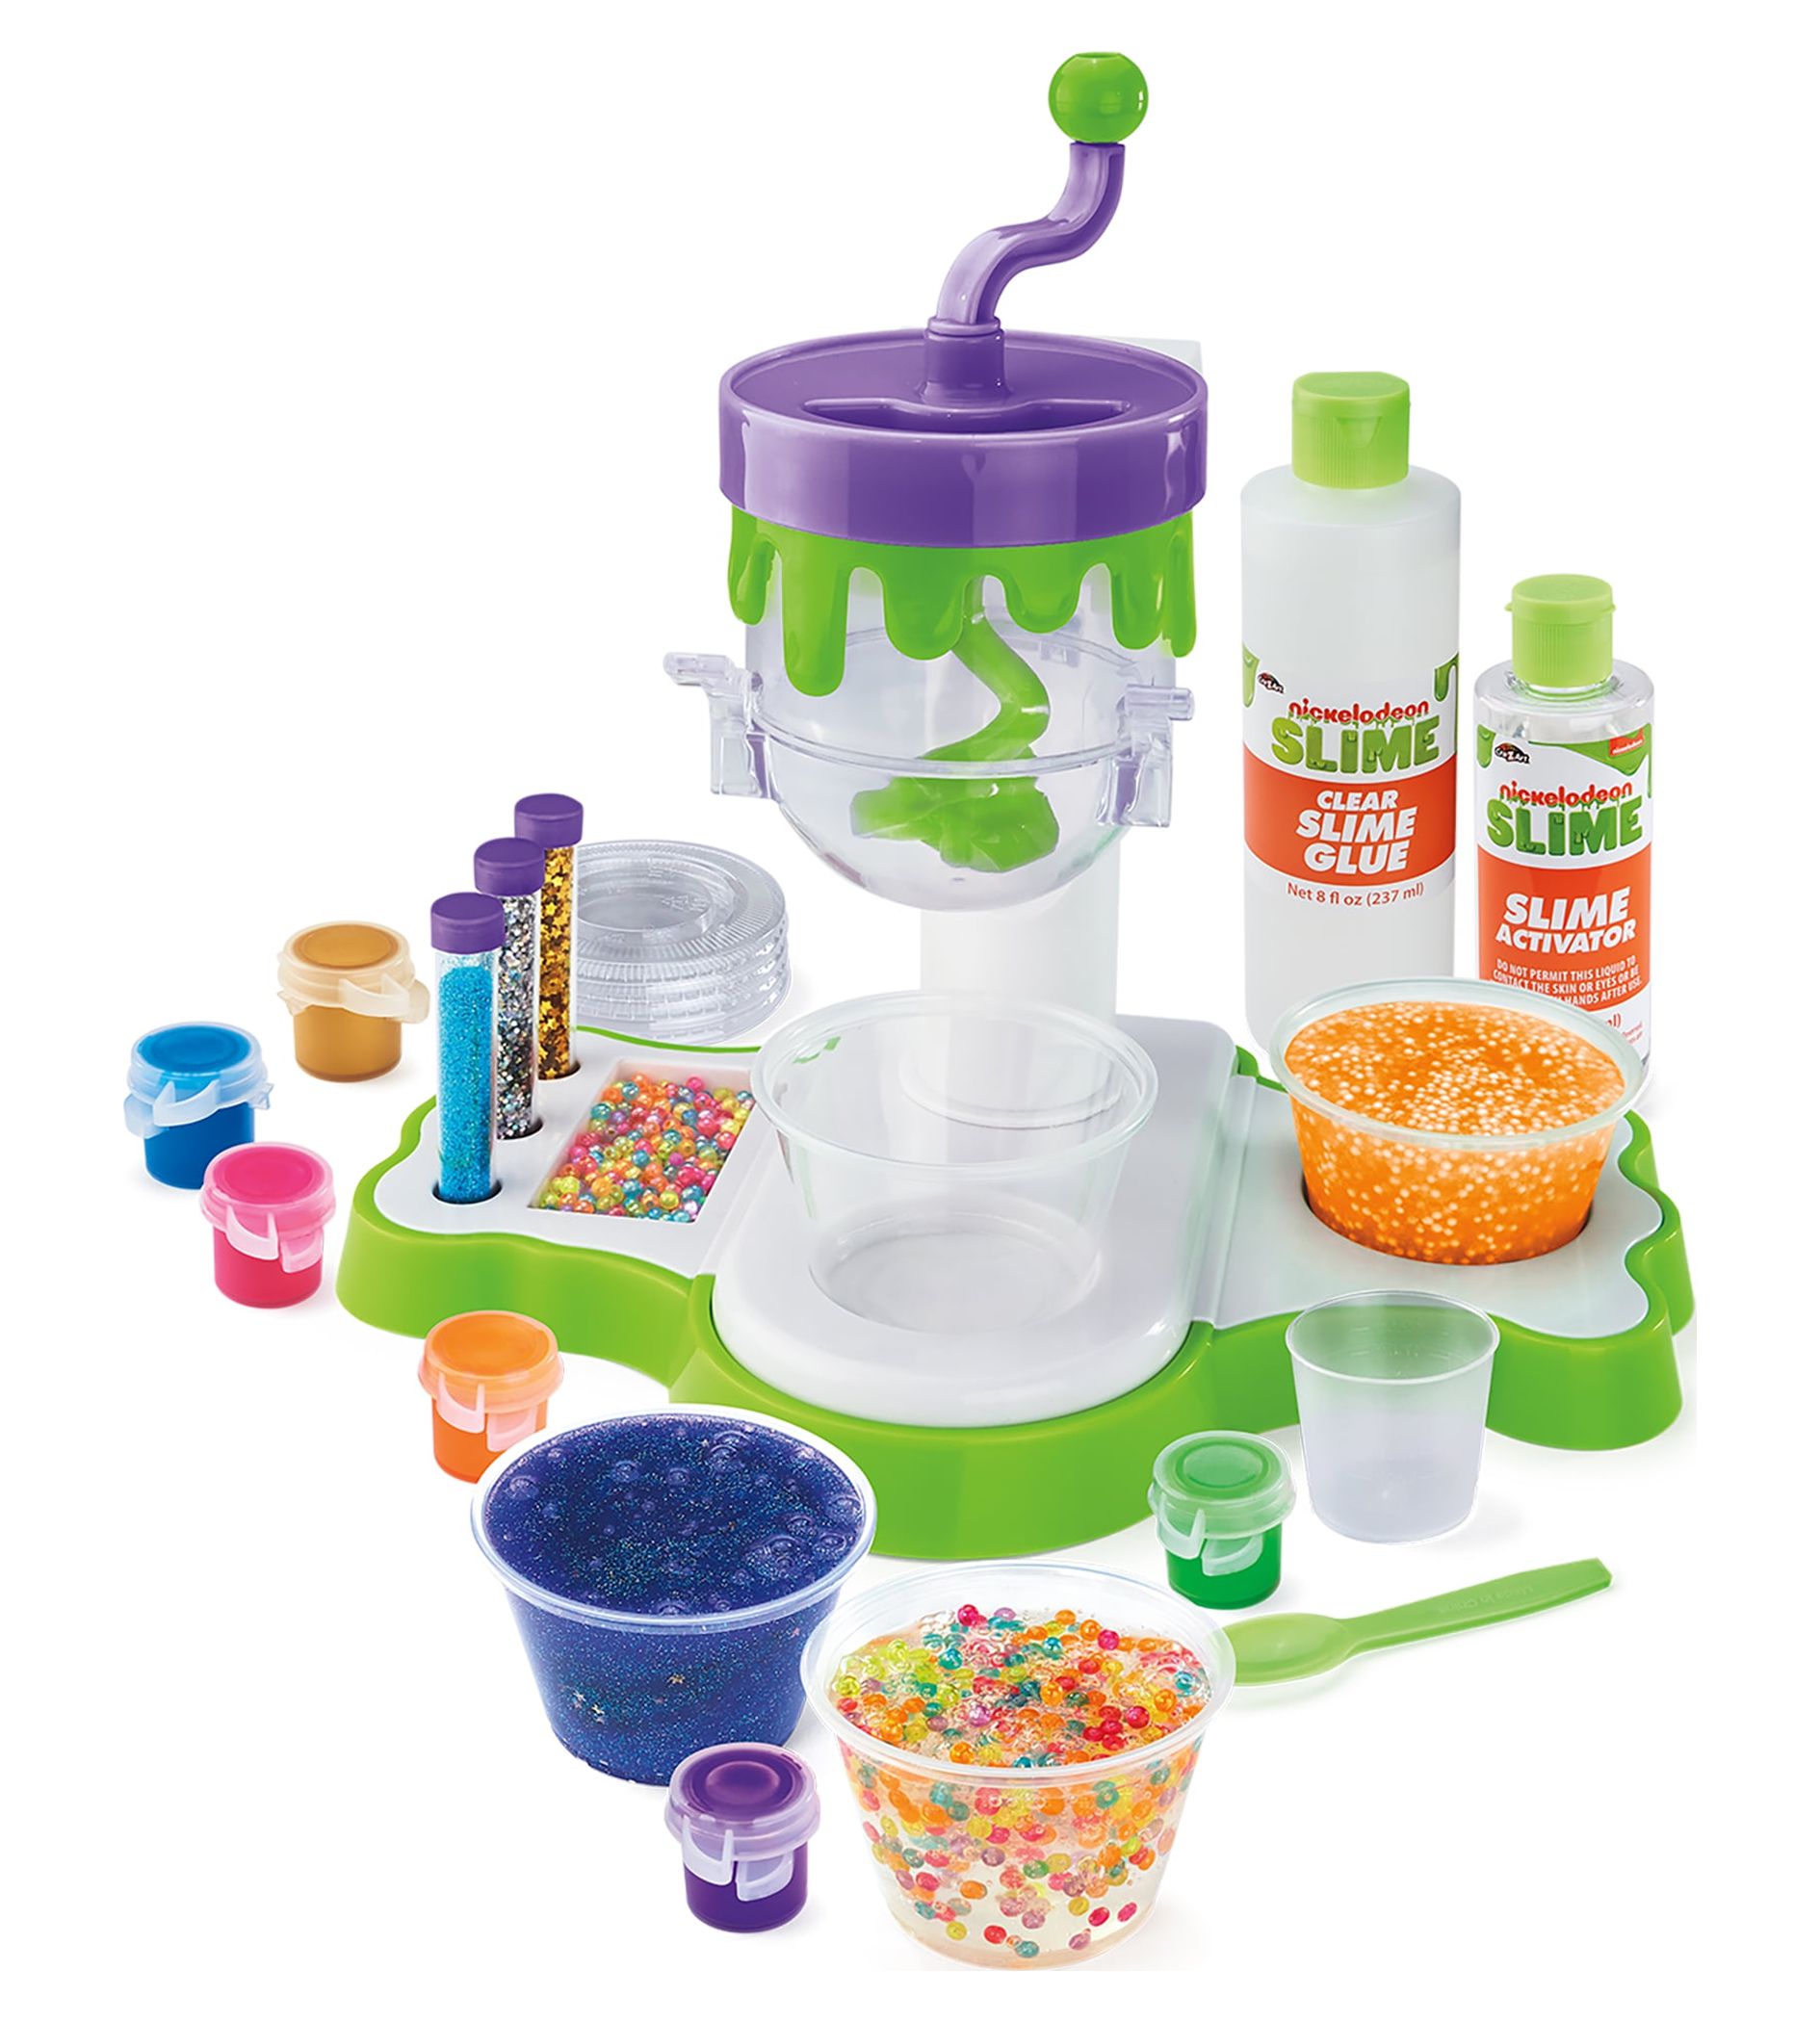 Cra-Z-Art - Nickleodeon Ultimate Slime Making Lab with Tabletop Mixer - image 5 of 12